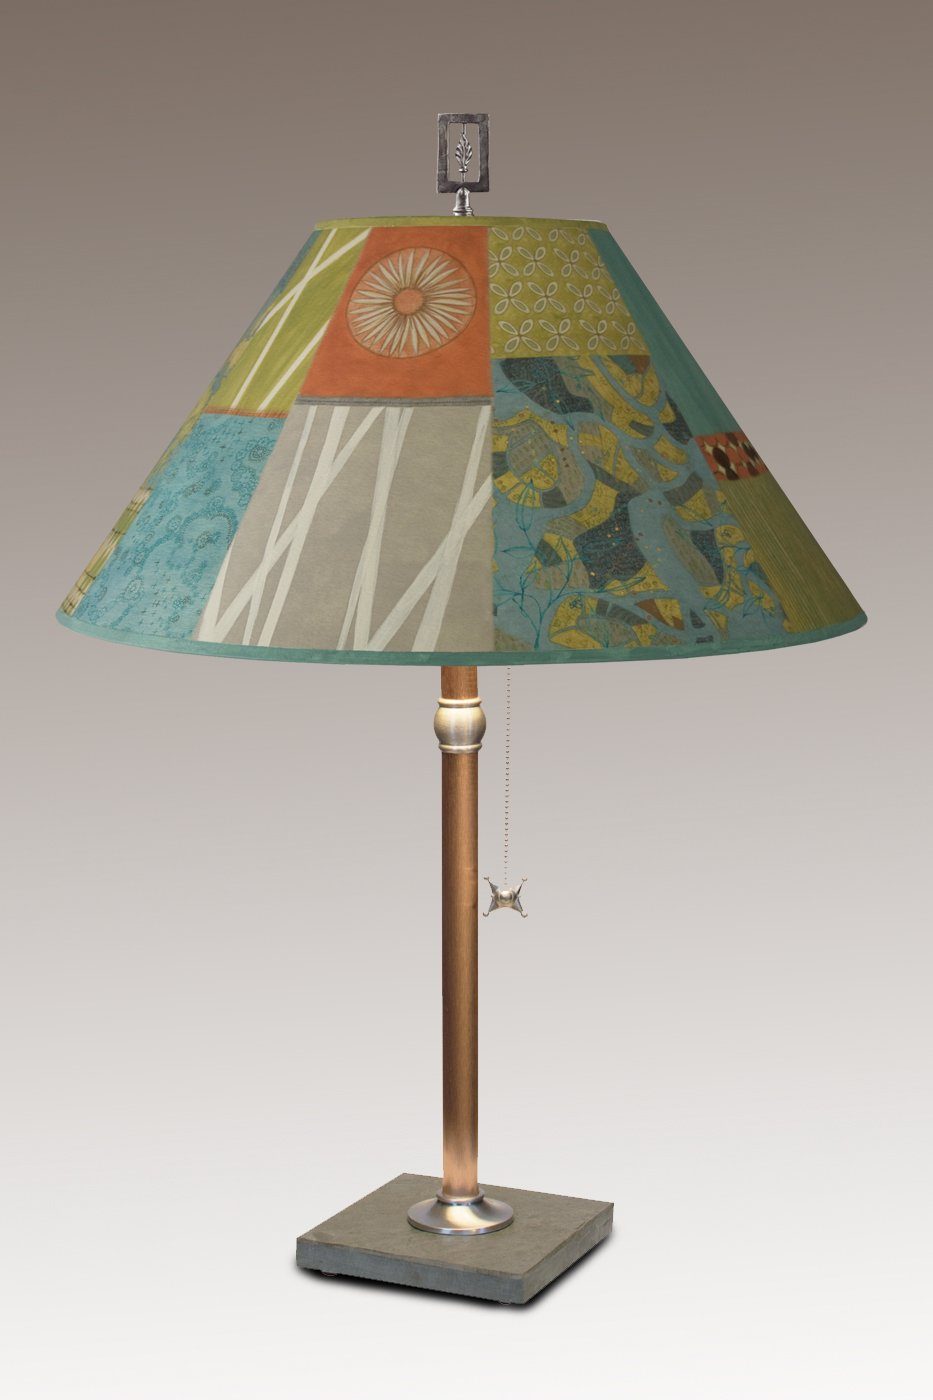 Janna Ugone &amp; Co Table Lamps Copper Table Lamp with Large Conical Shade in Zest